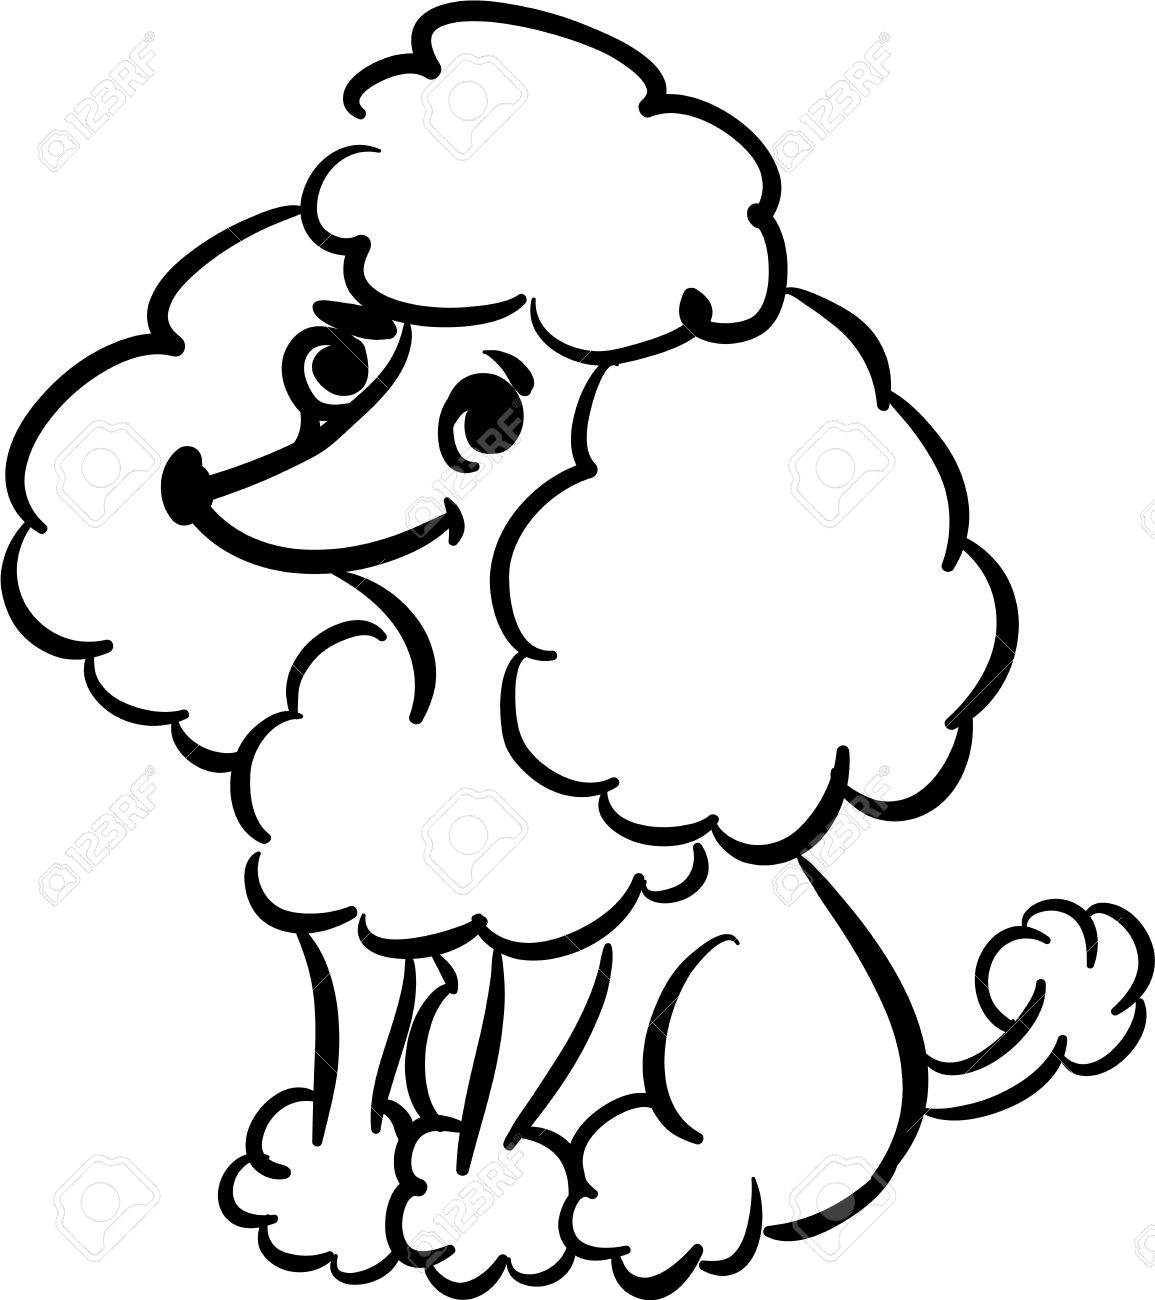 2,264 Poodle Cliparts, Stock Vector And Royalty Free Poodle.